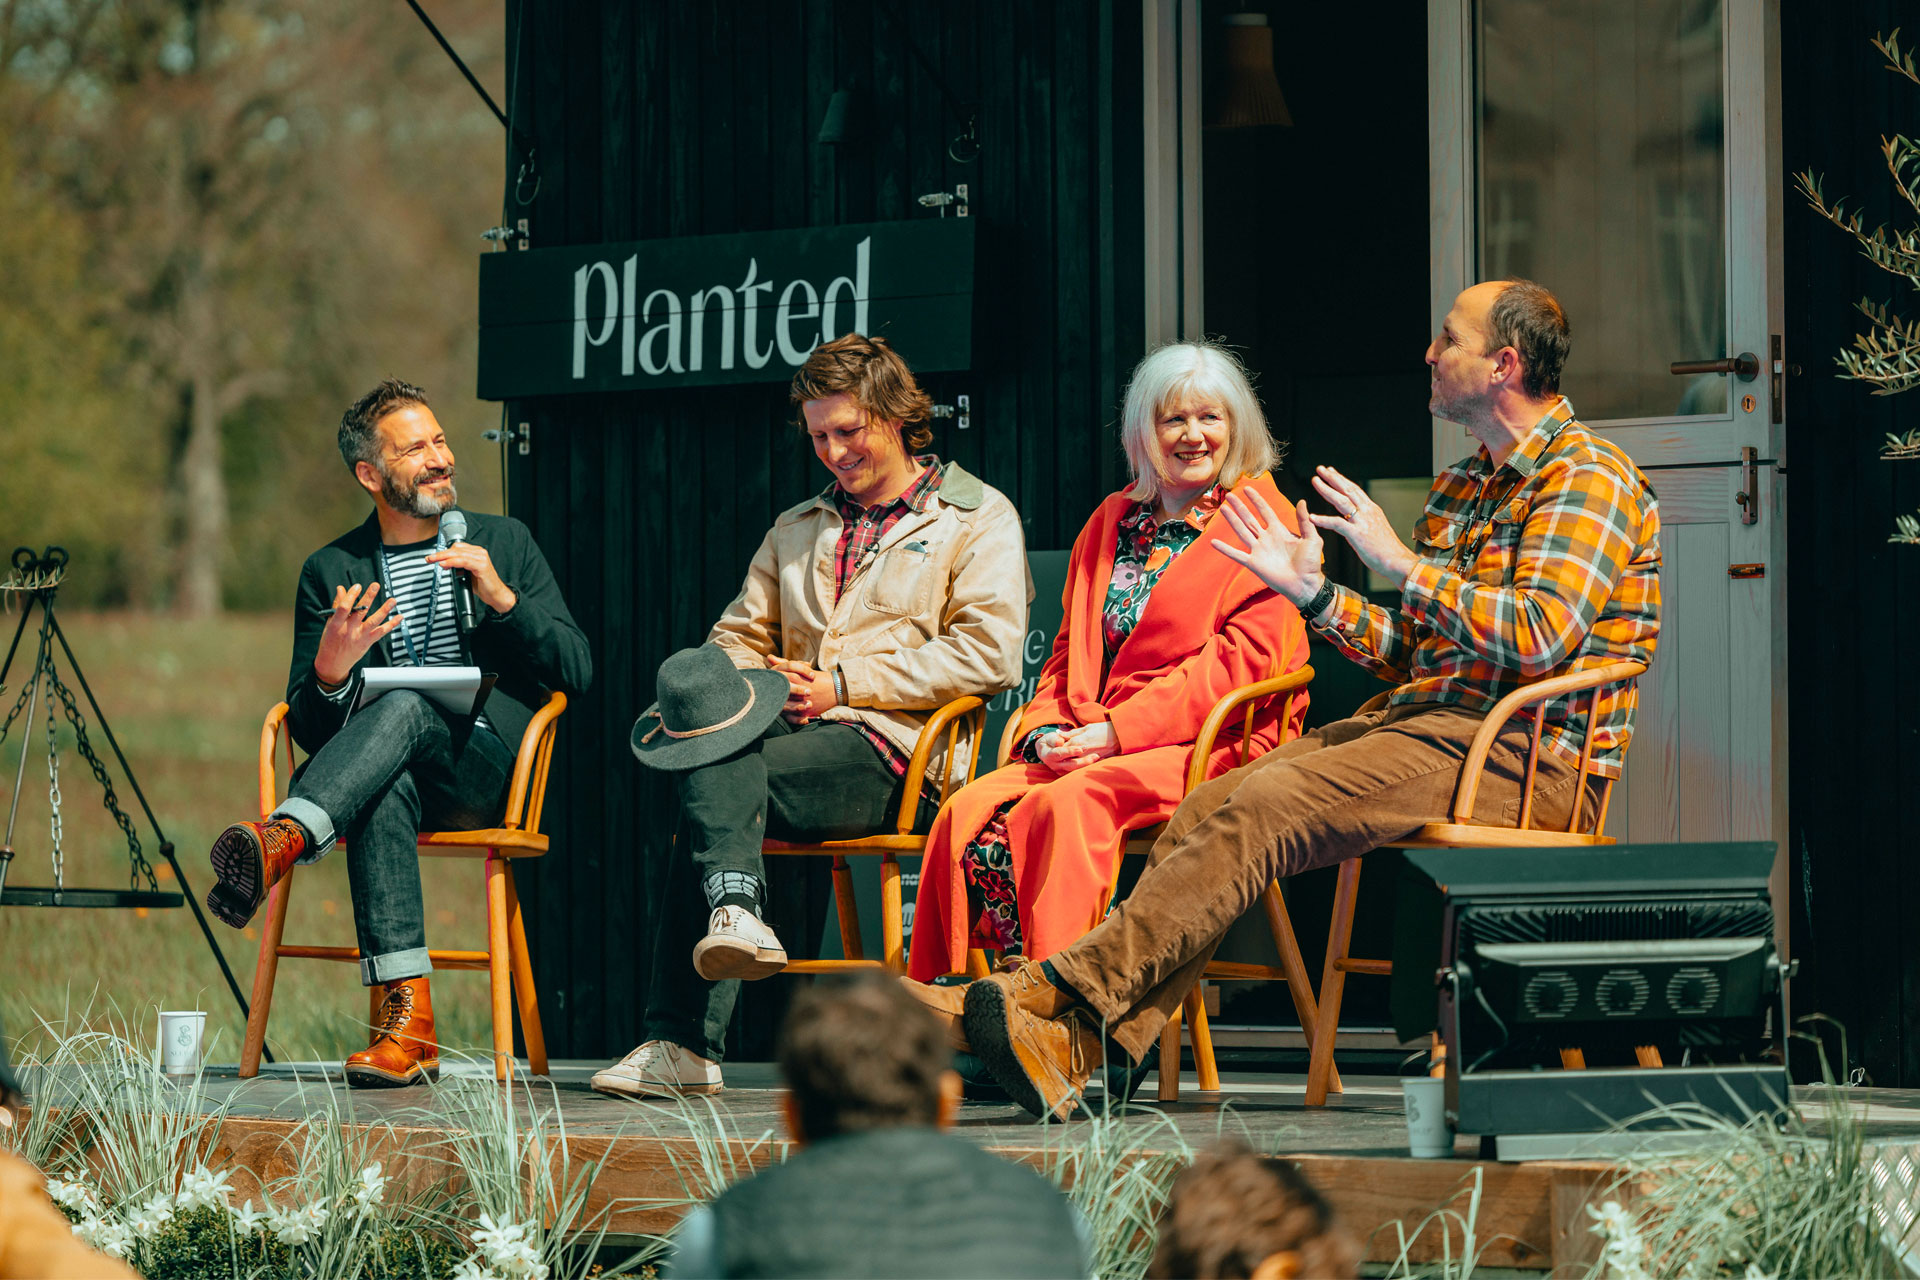 A panel talk at Planted